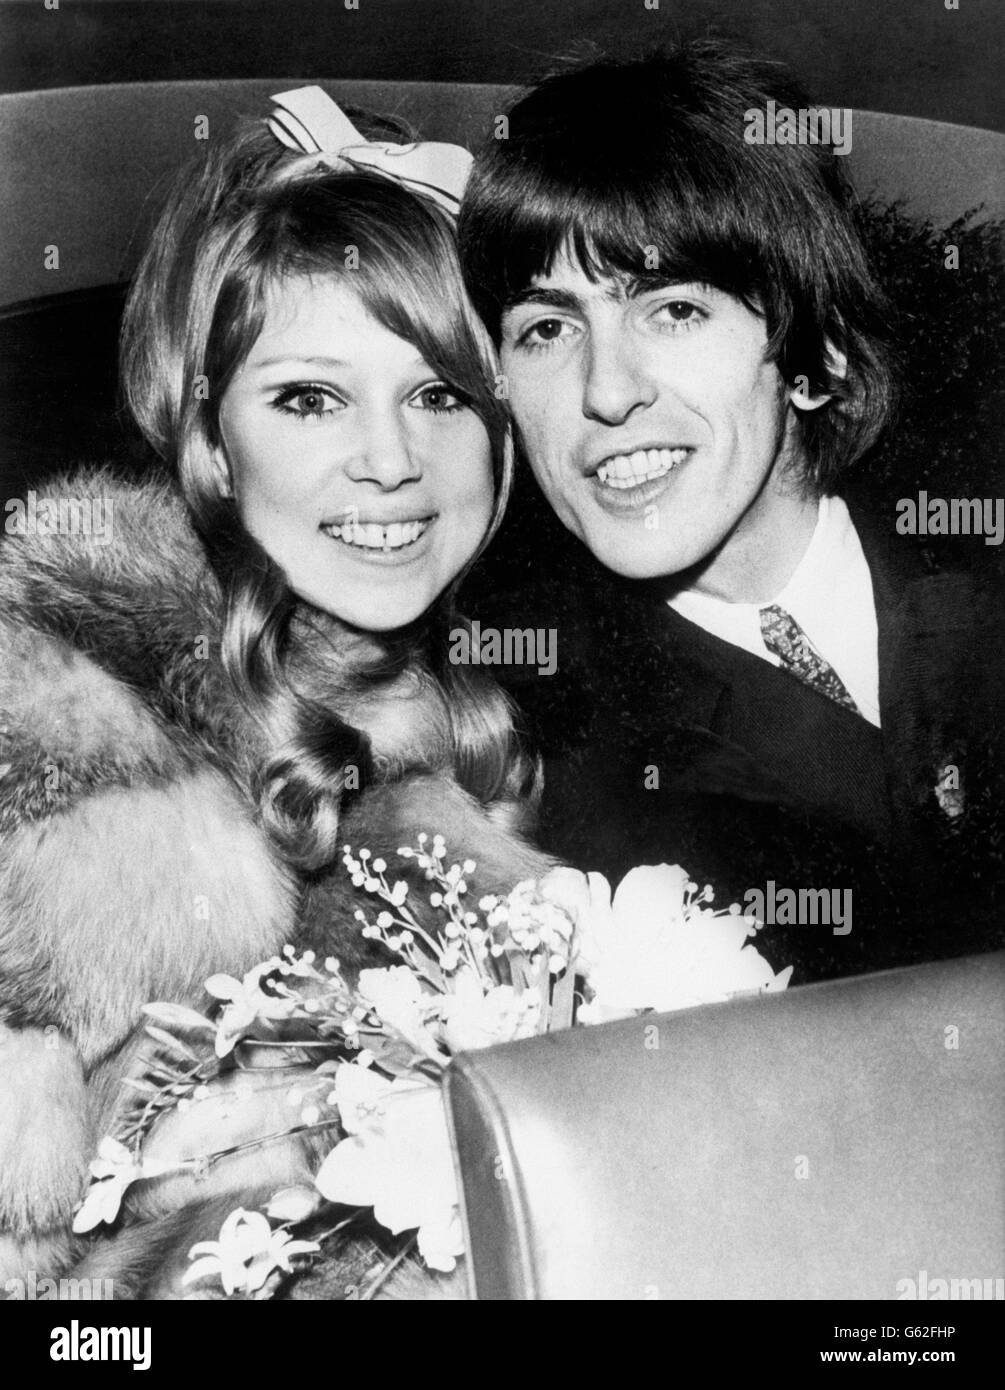 Beatles star george harrison marries patti boyd Black and White Stock ...